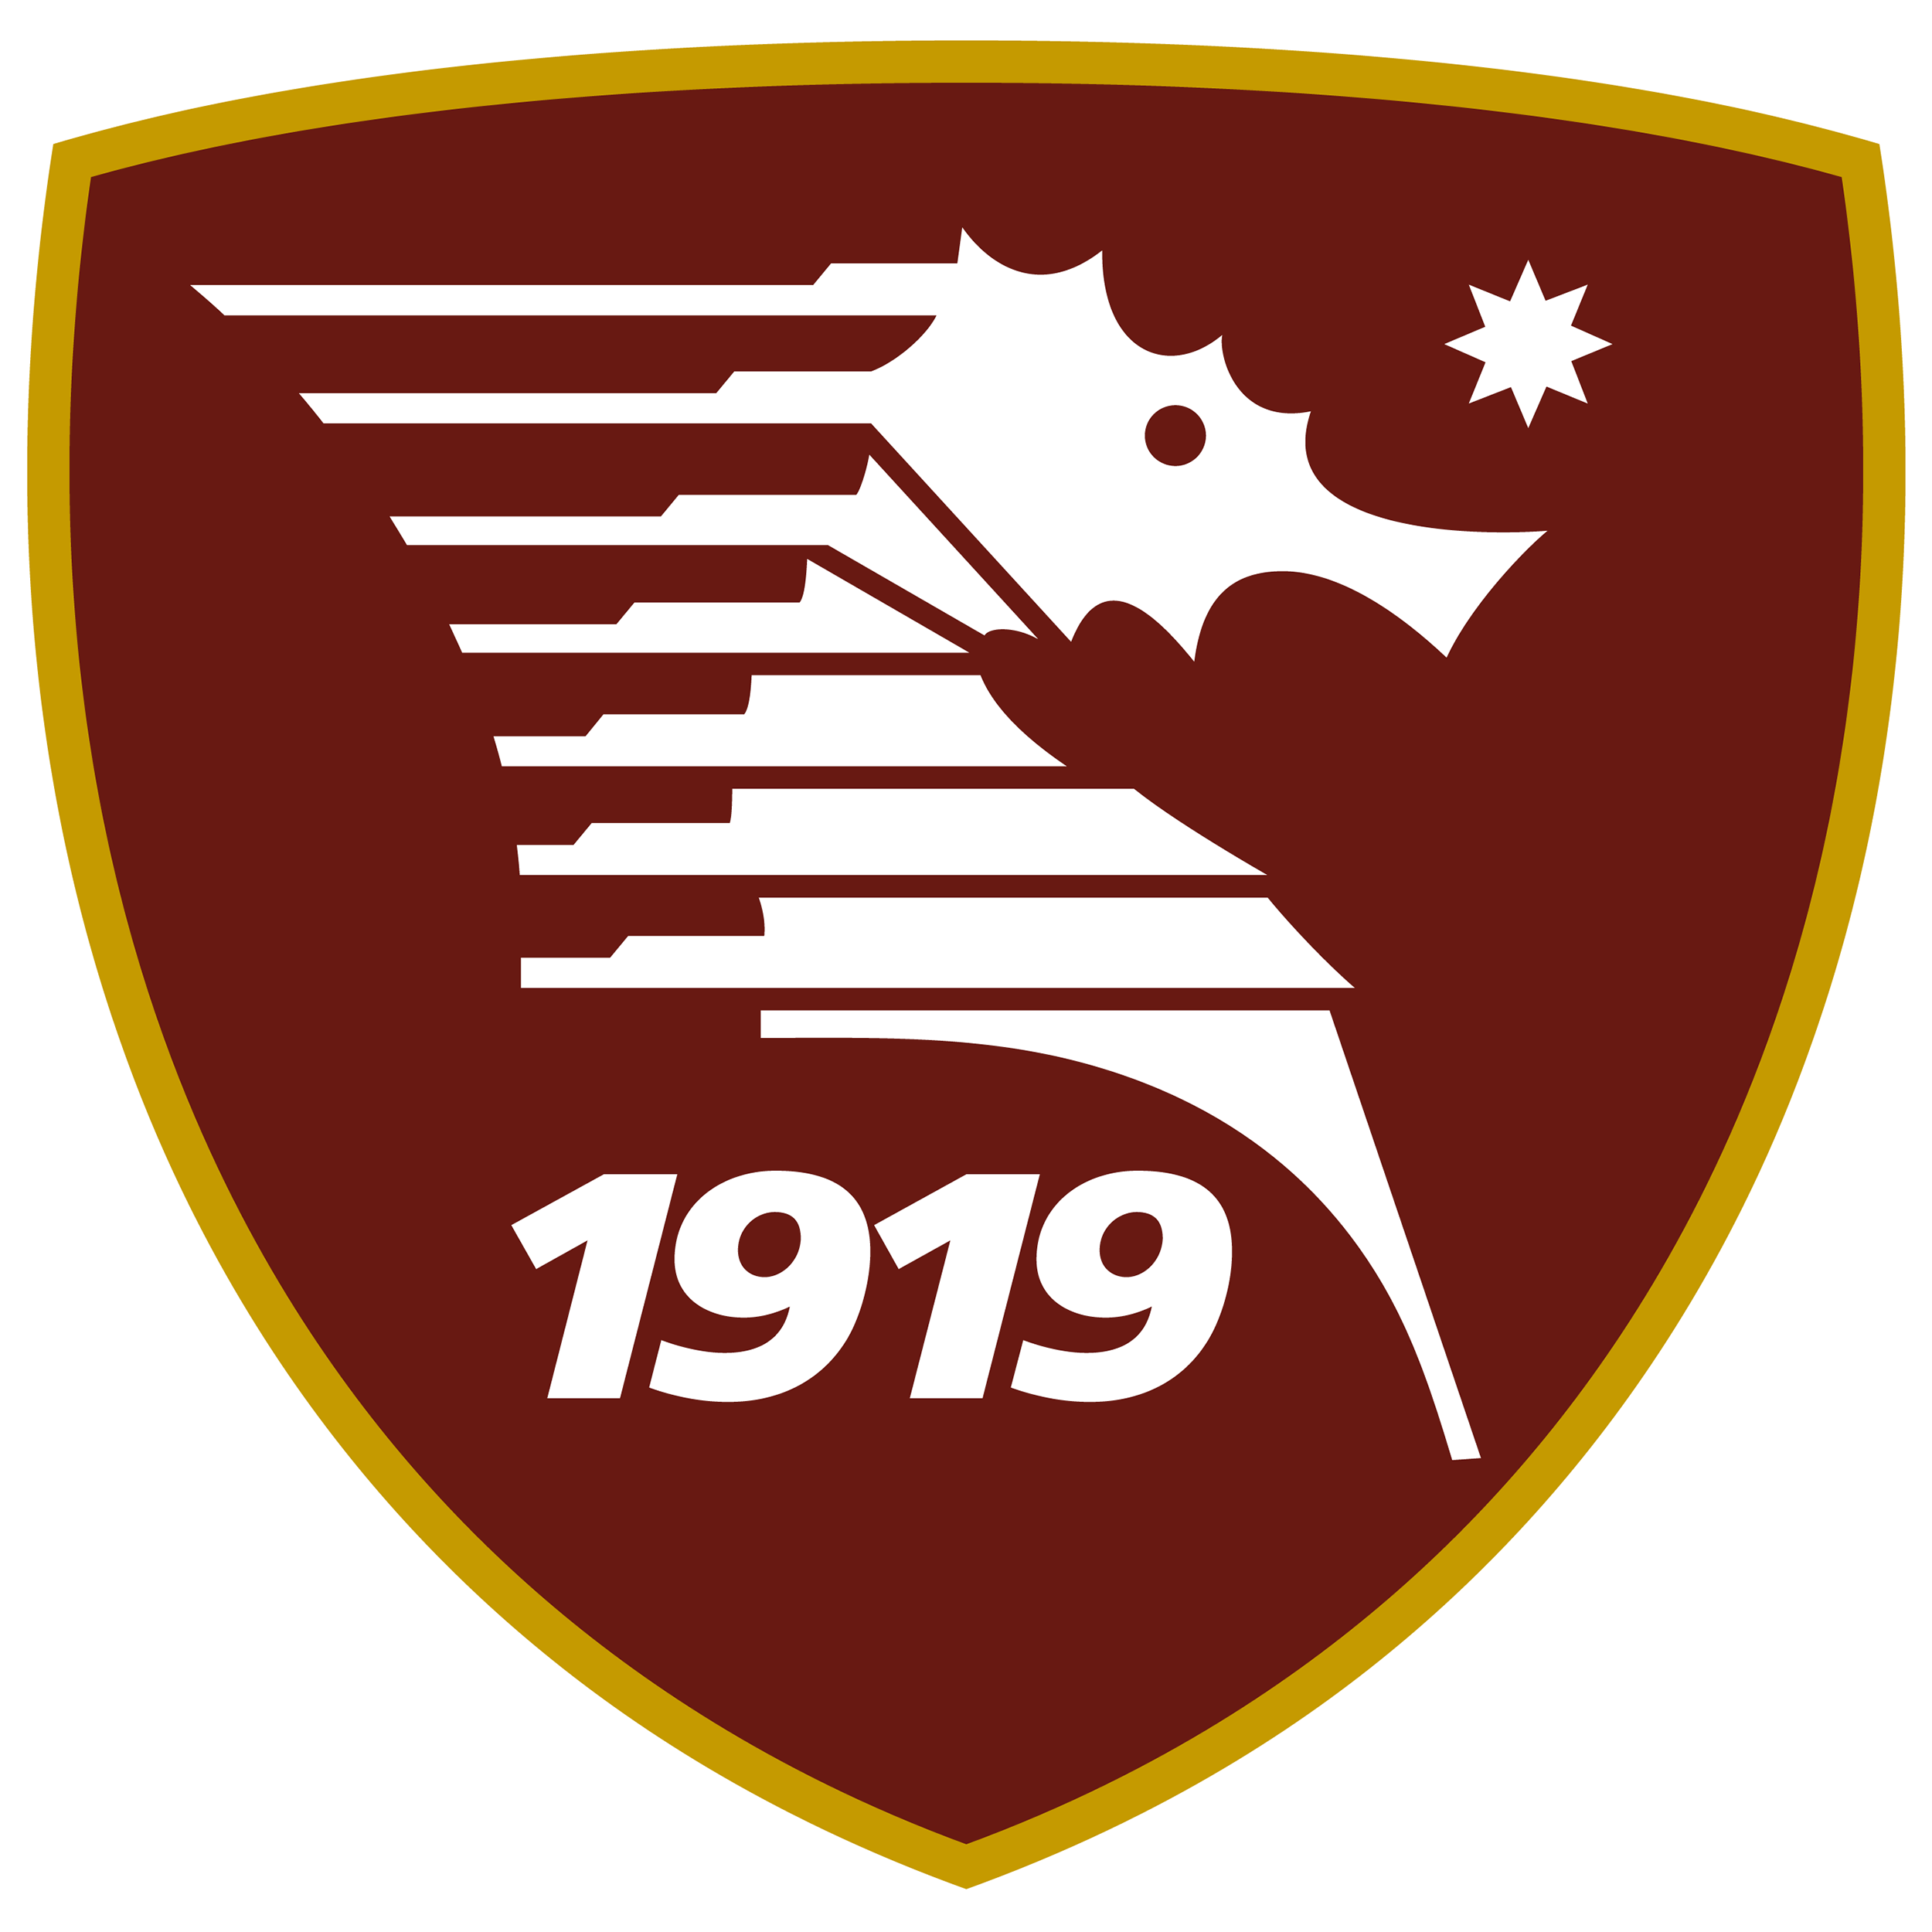 Udinese vs Salernitana Prediction: Will the guest's situation not improve?